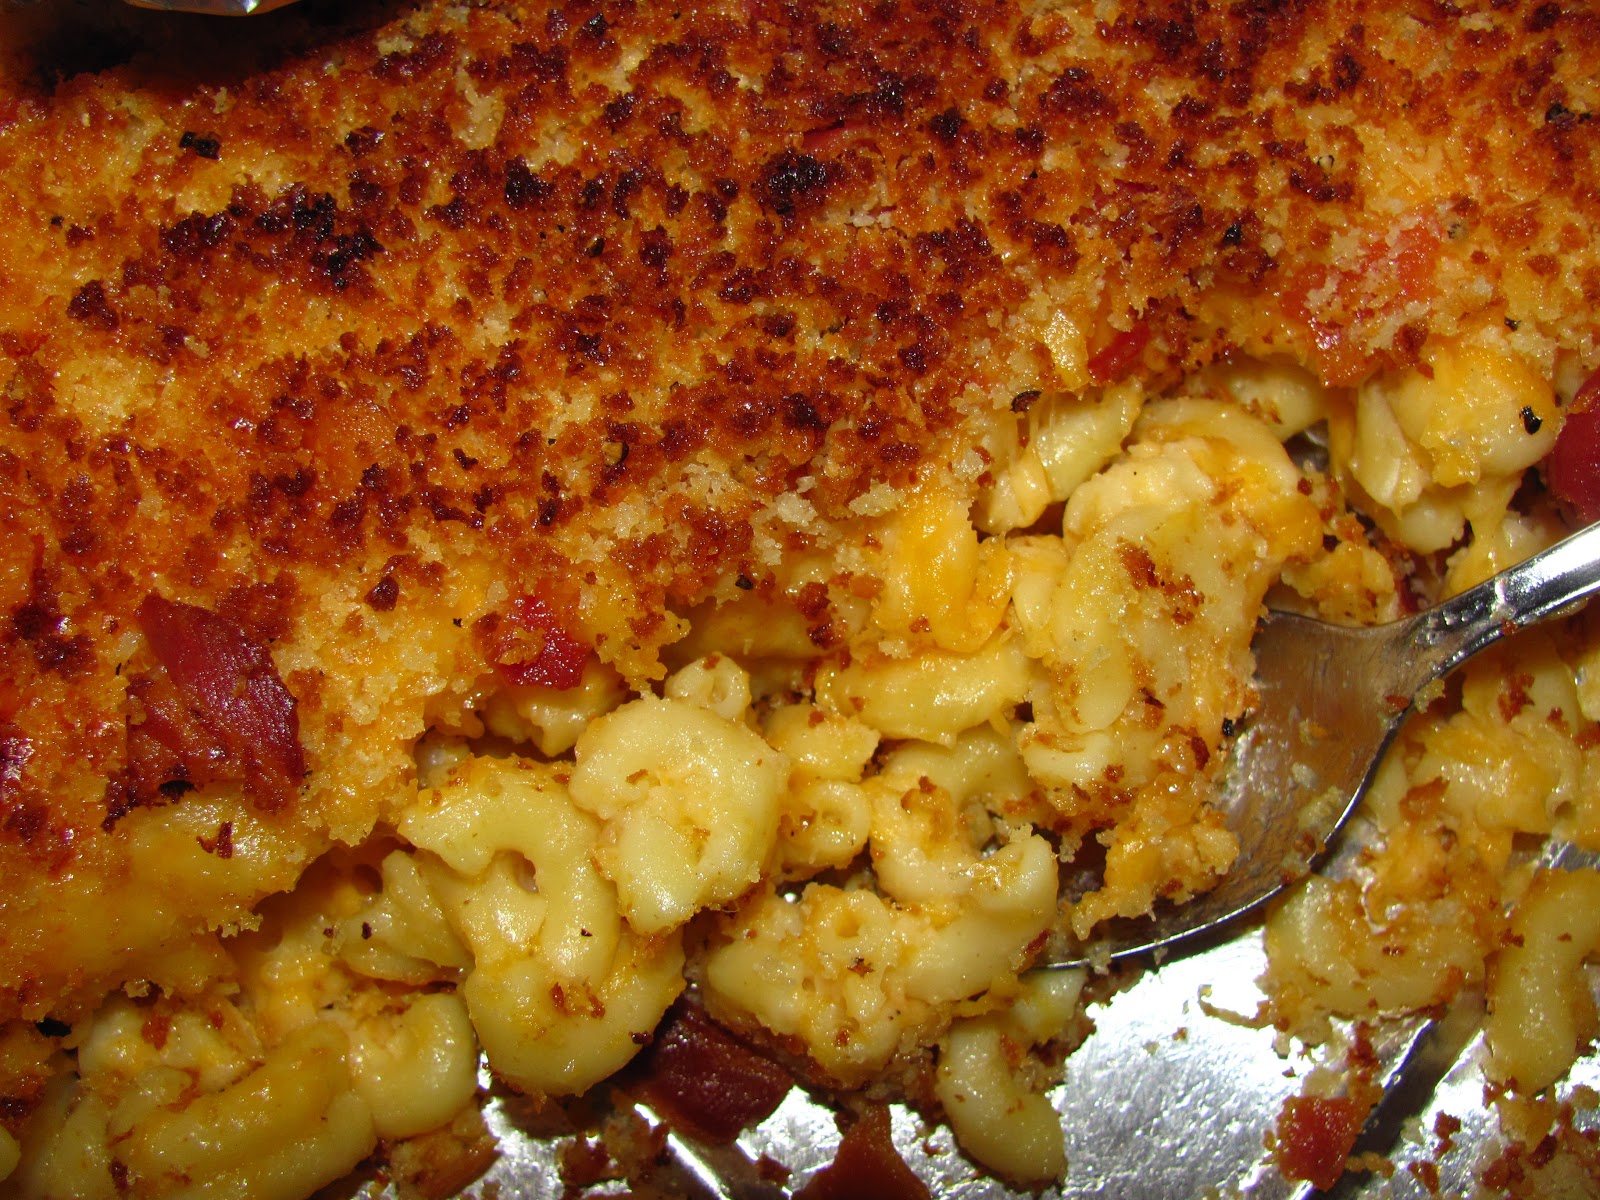 For the Love of Food: Crunchy Bacon Macaroni and Cheese